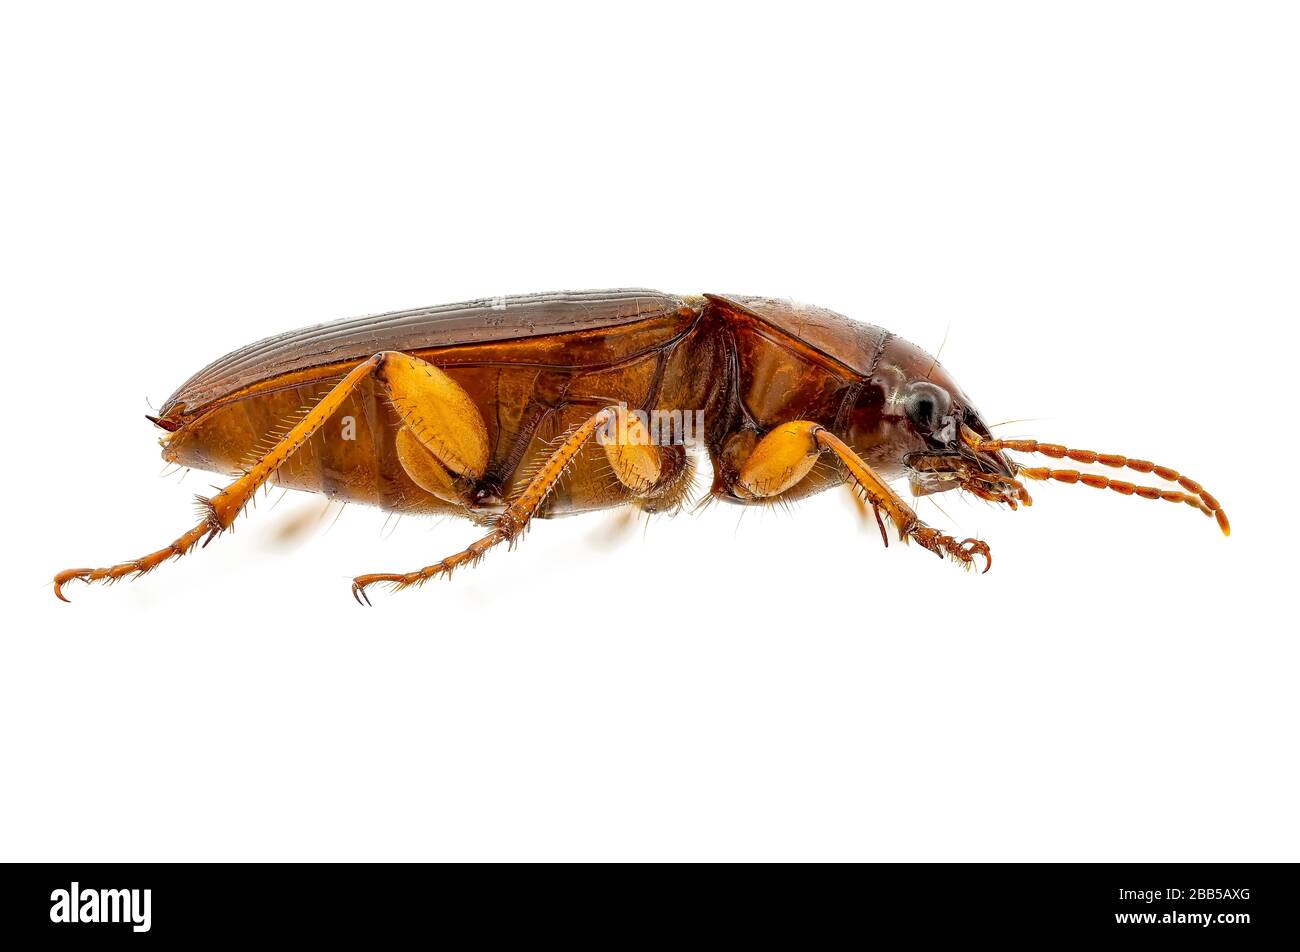 Side view on a harpalus erraticus coleoptera from an insect collection on a white background Stock Photo